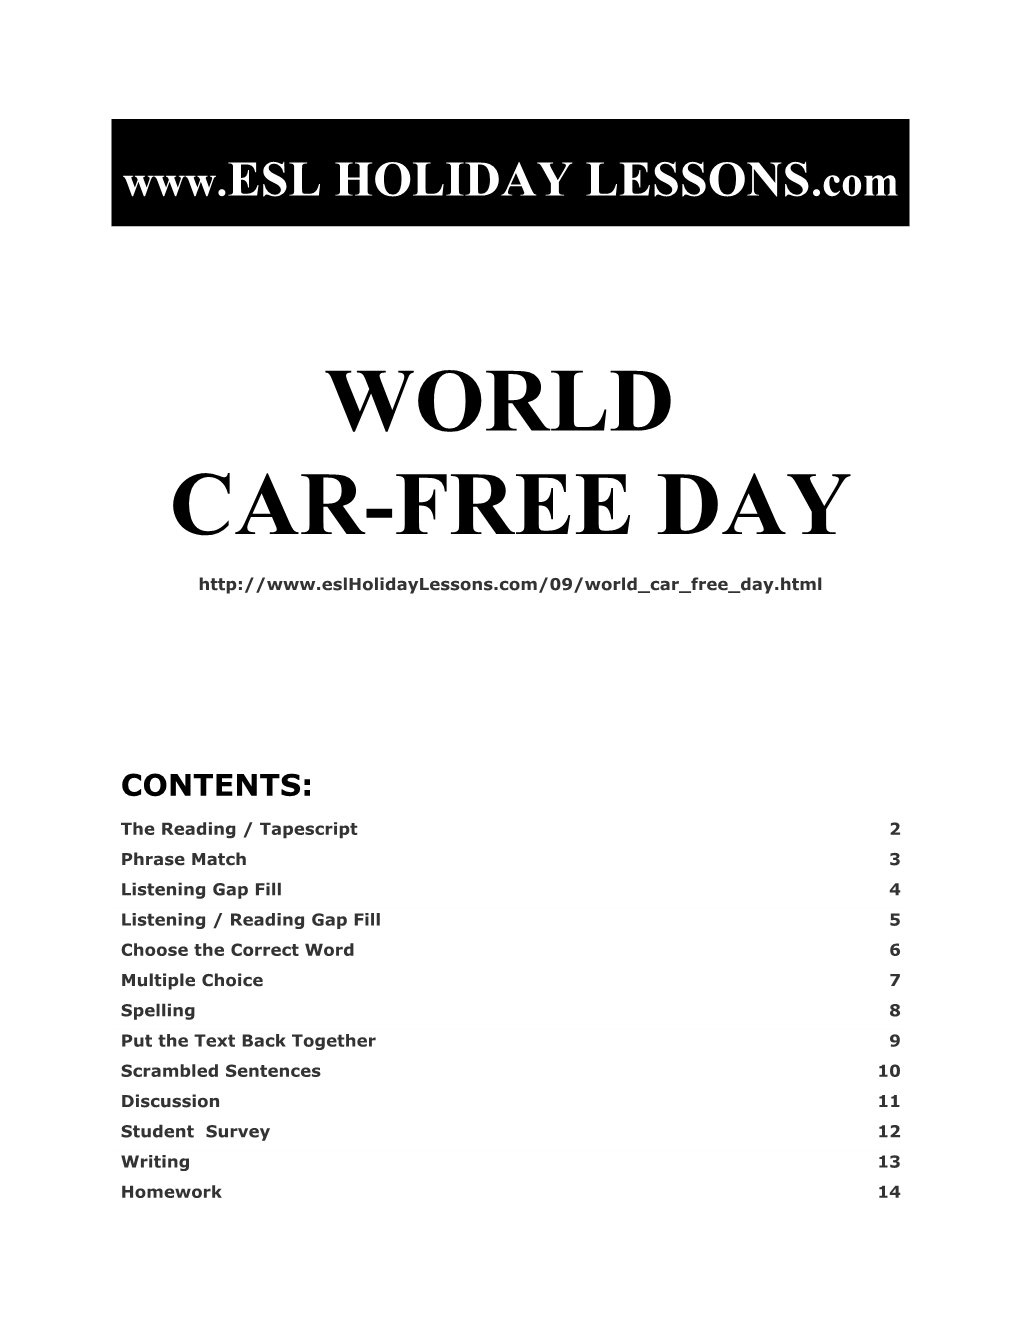 Holiday Lessons - World Car-Free Day